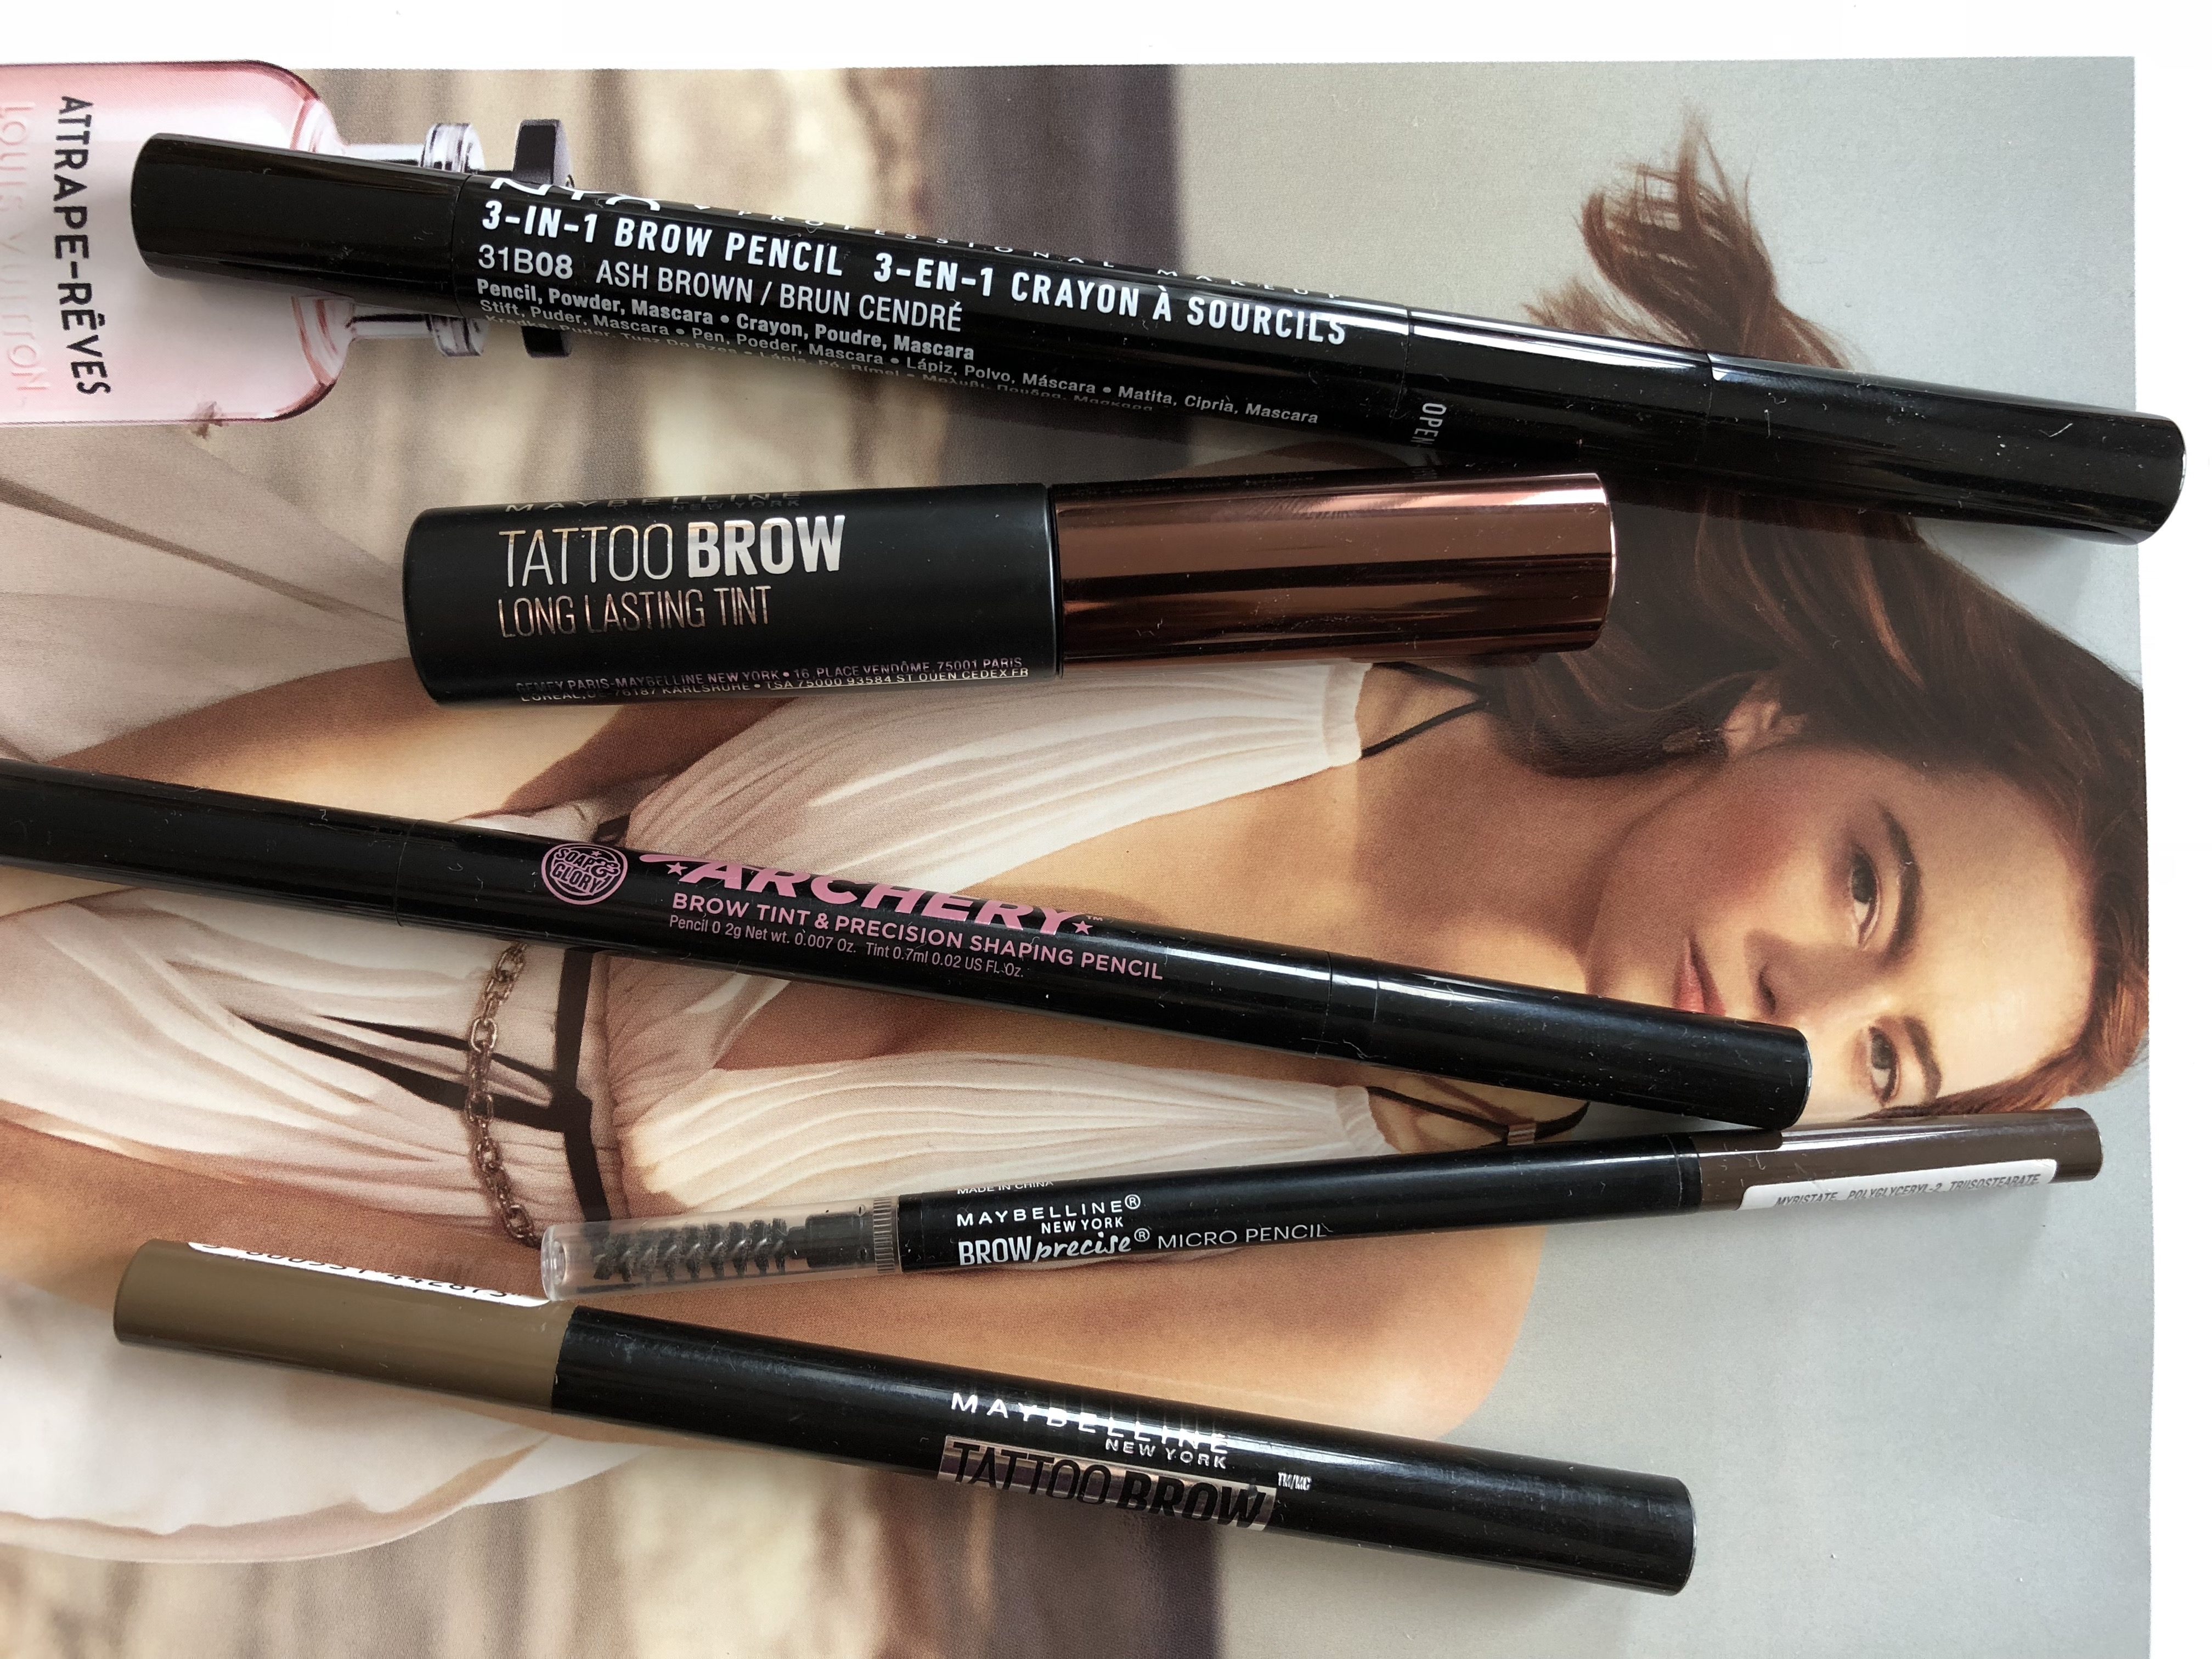 A REVIEW OF THE BEST AFFORDABLE, LONG-LASTING BROW PRODUCTS - Face Made Up  - Beauty Product Reviews, Makeup Tutorial Videos & Lifestyle